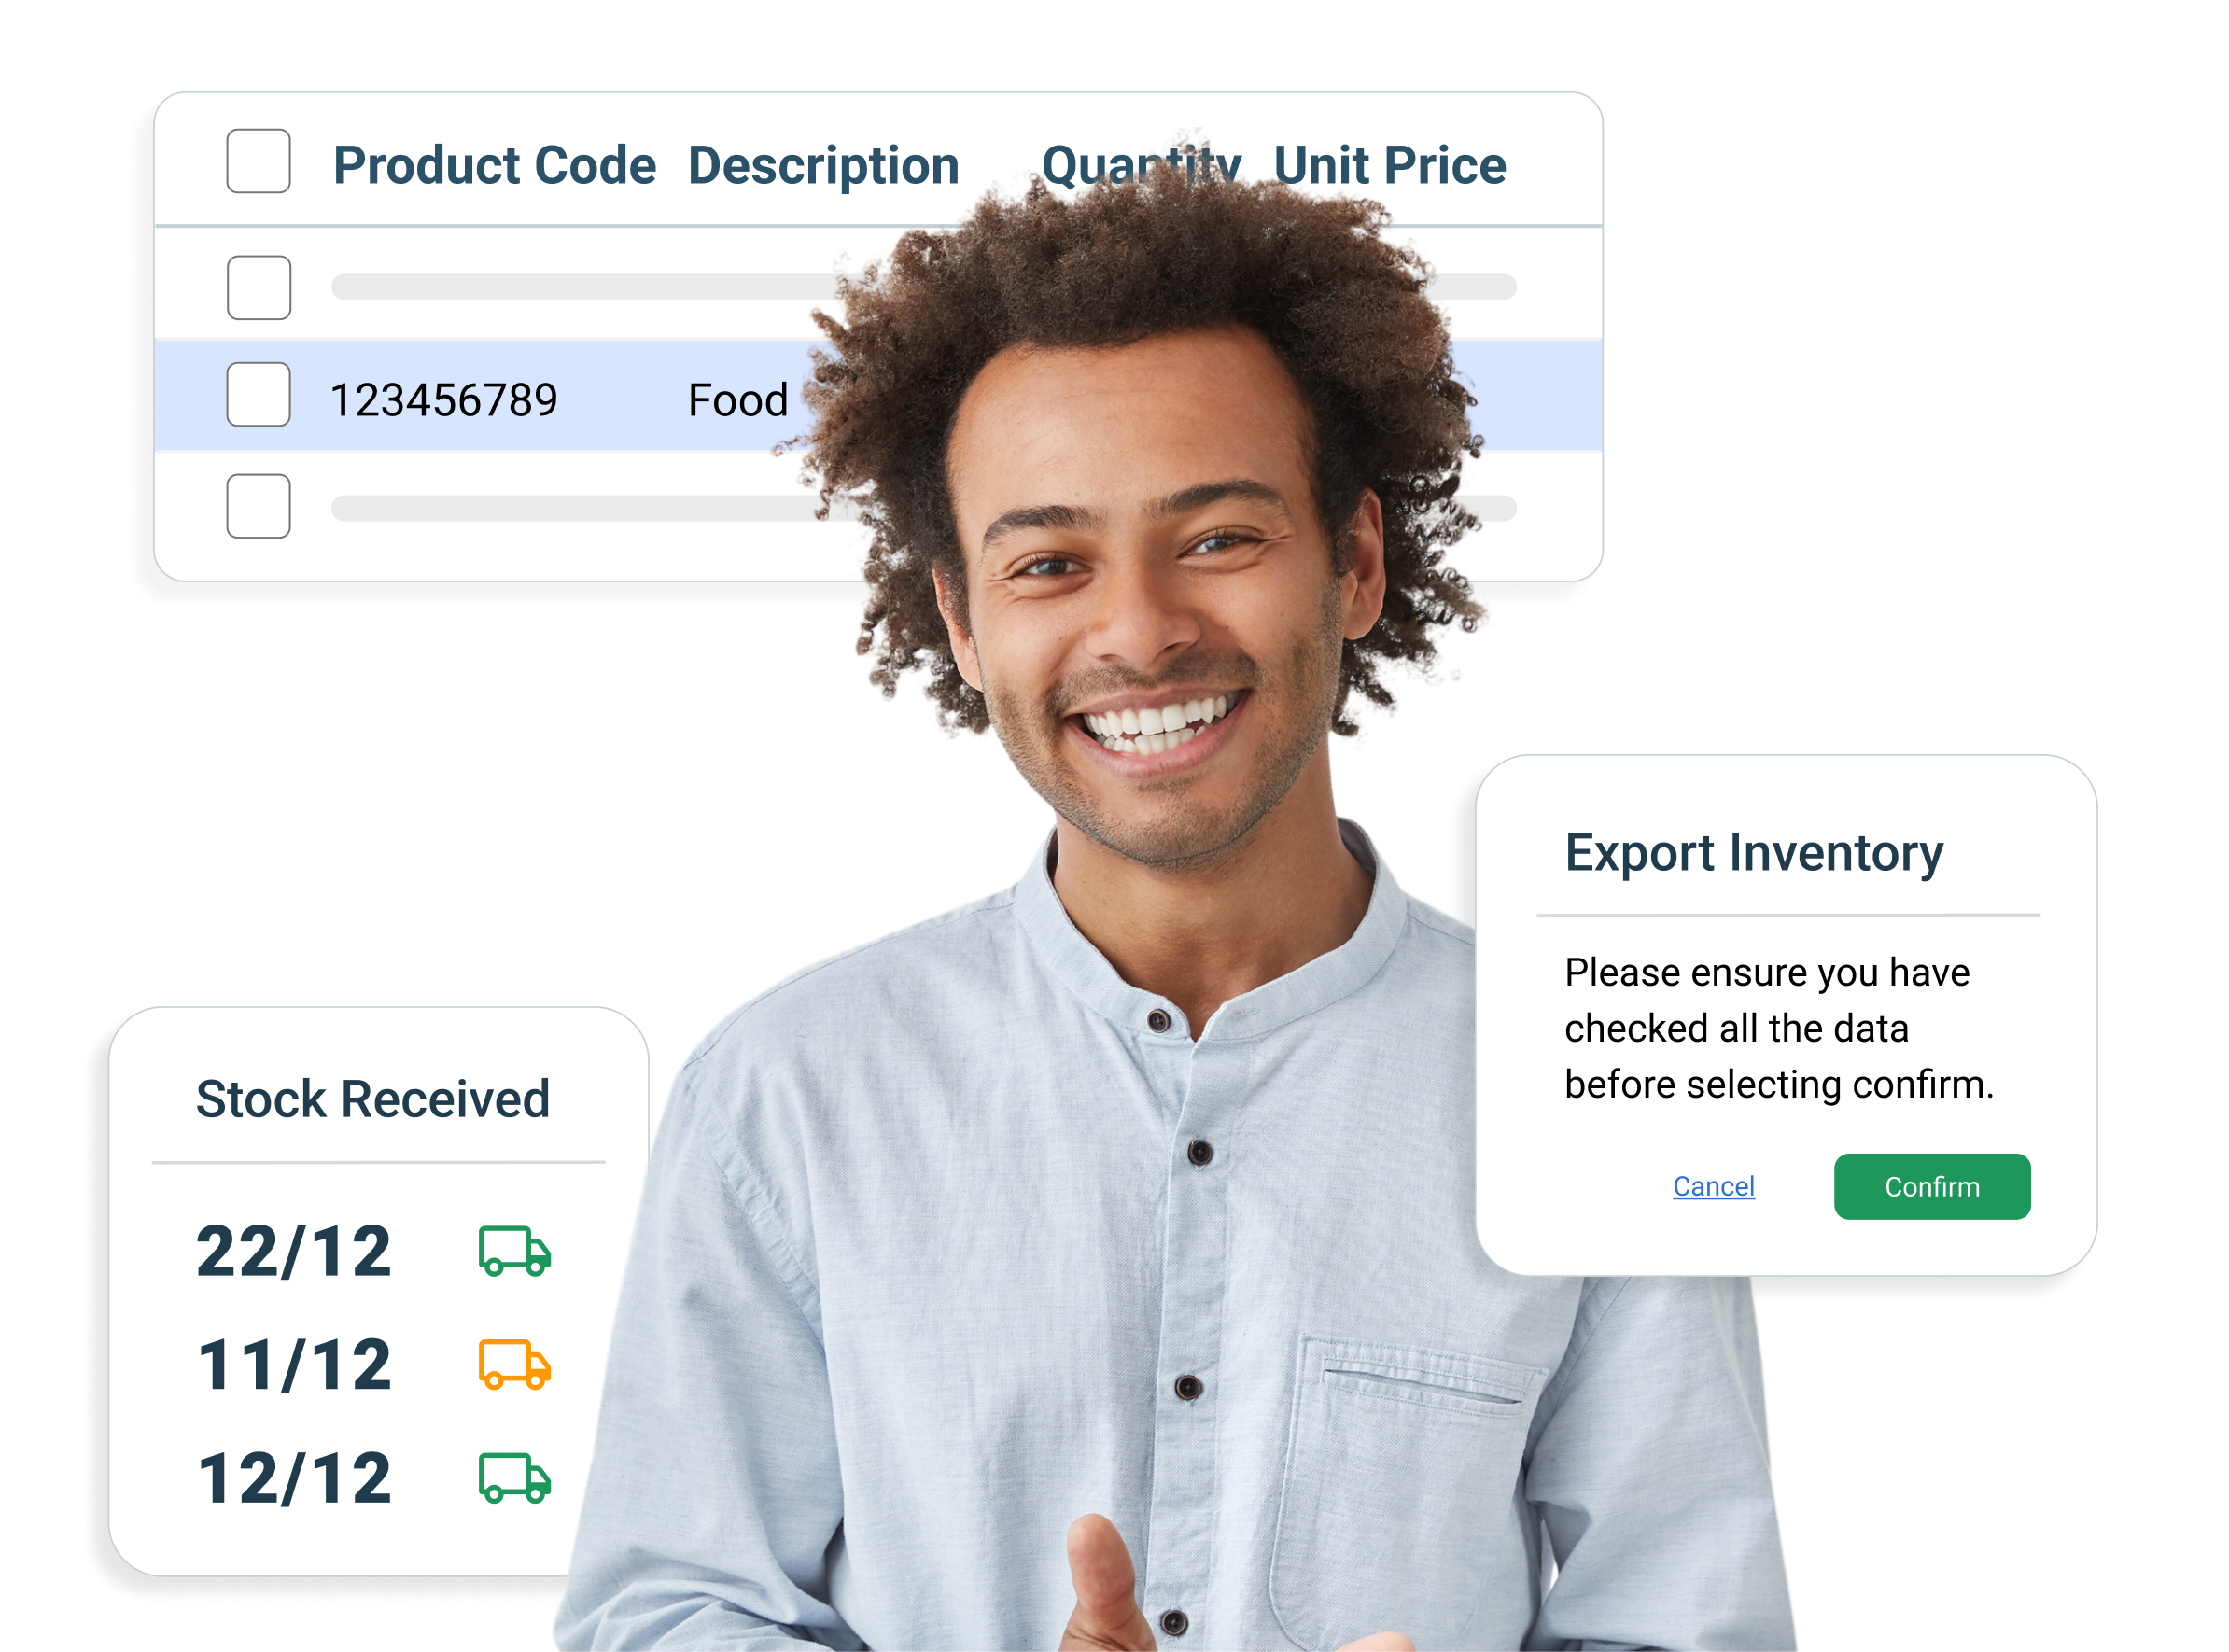 Inventory Management
Get real-time stock data in your inventory system by syncing your stock and quantity data from your supplier bills with your stock management system. 